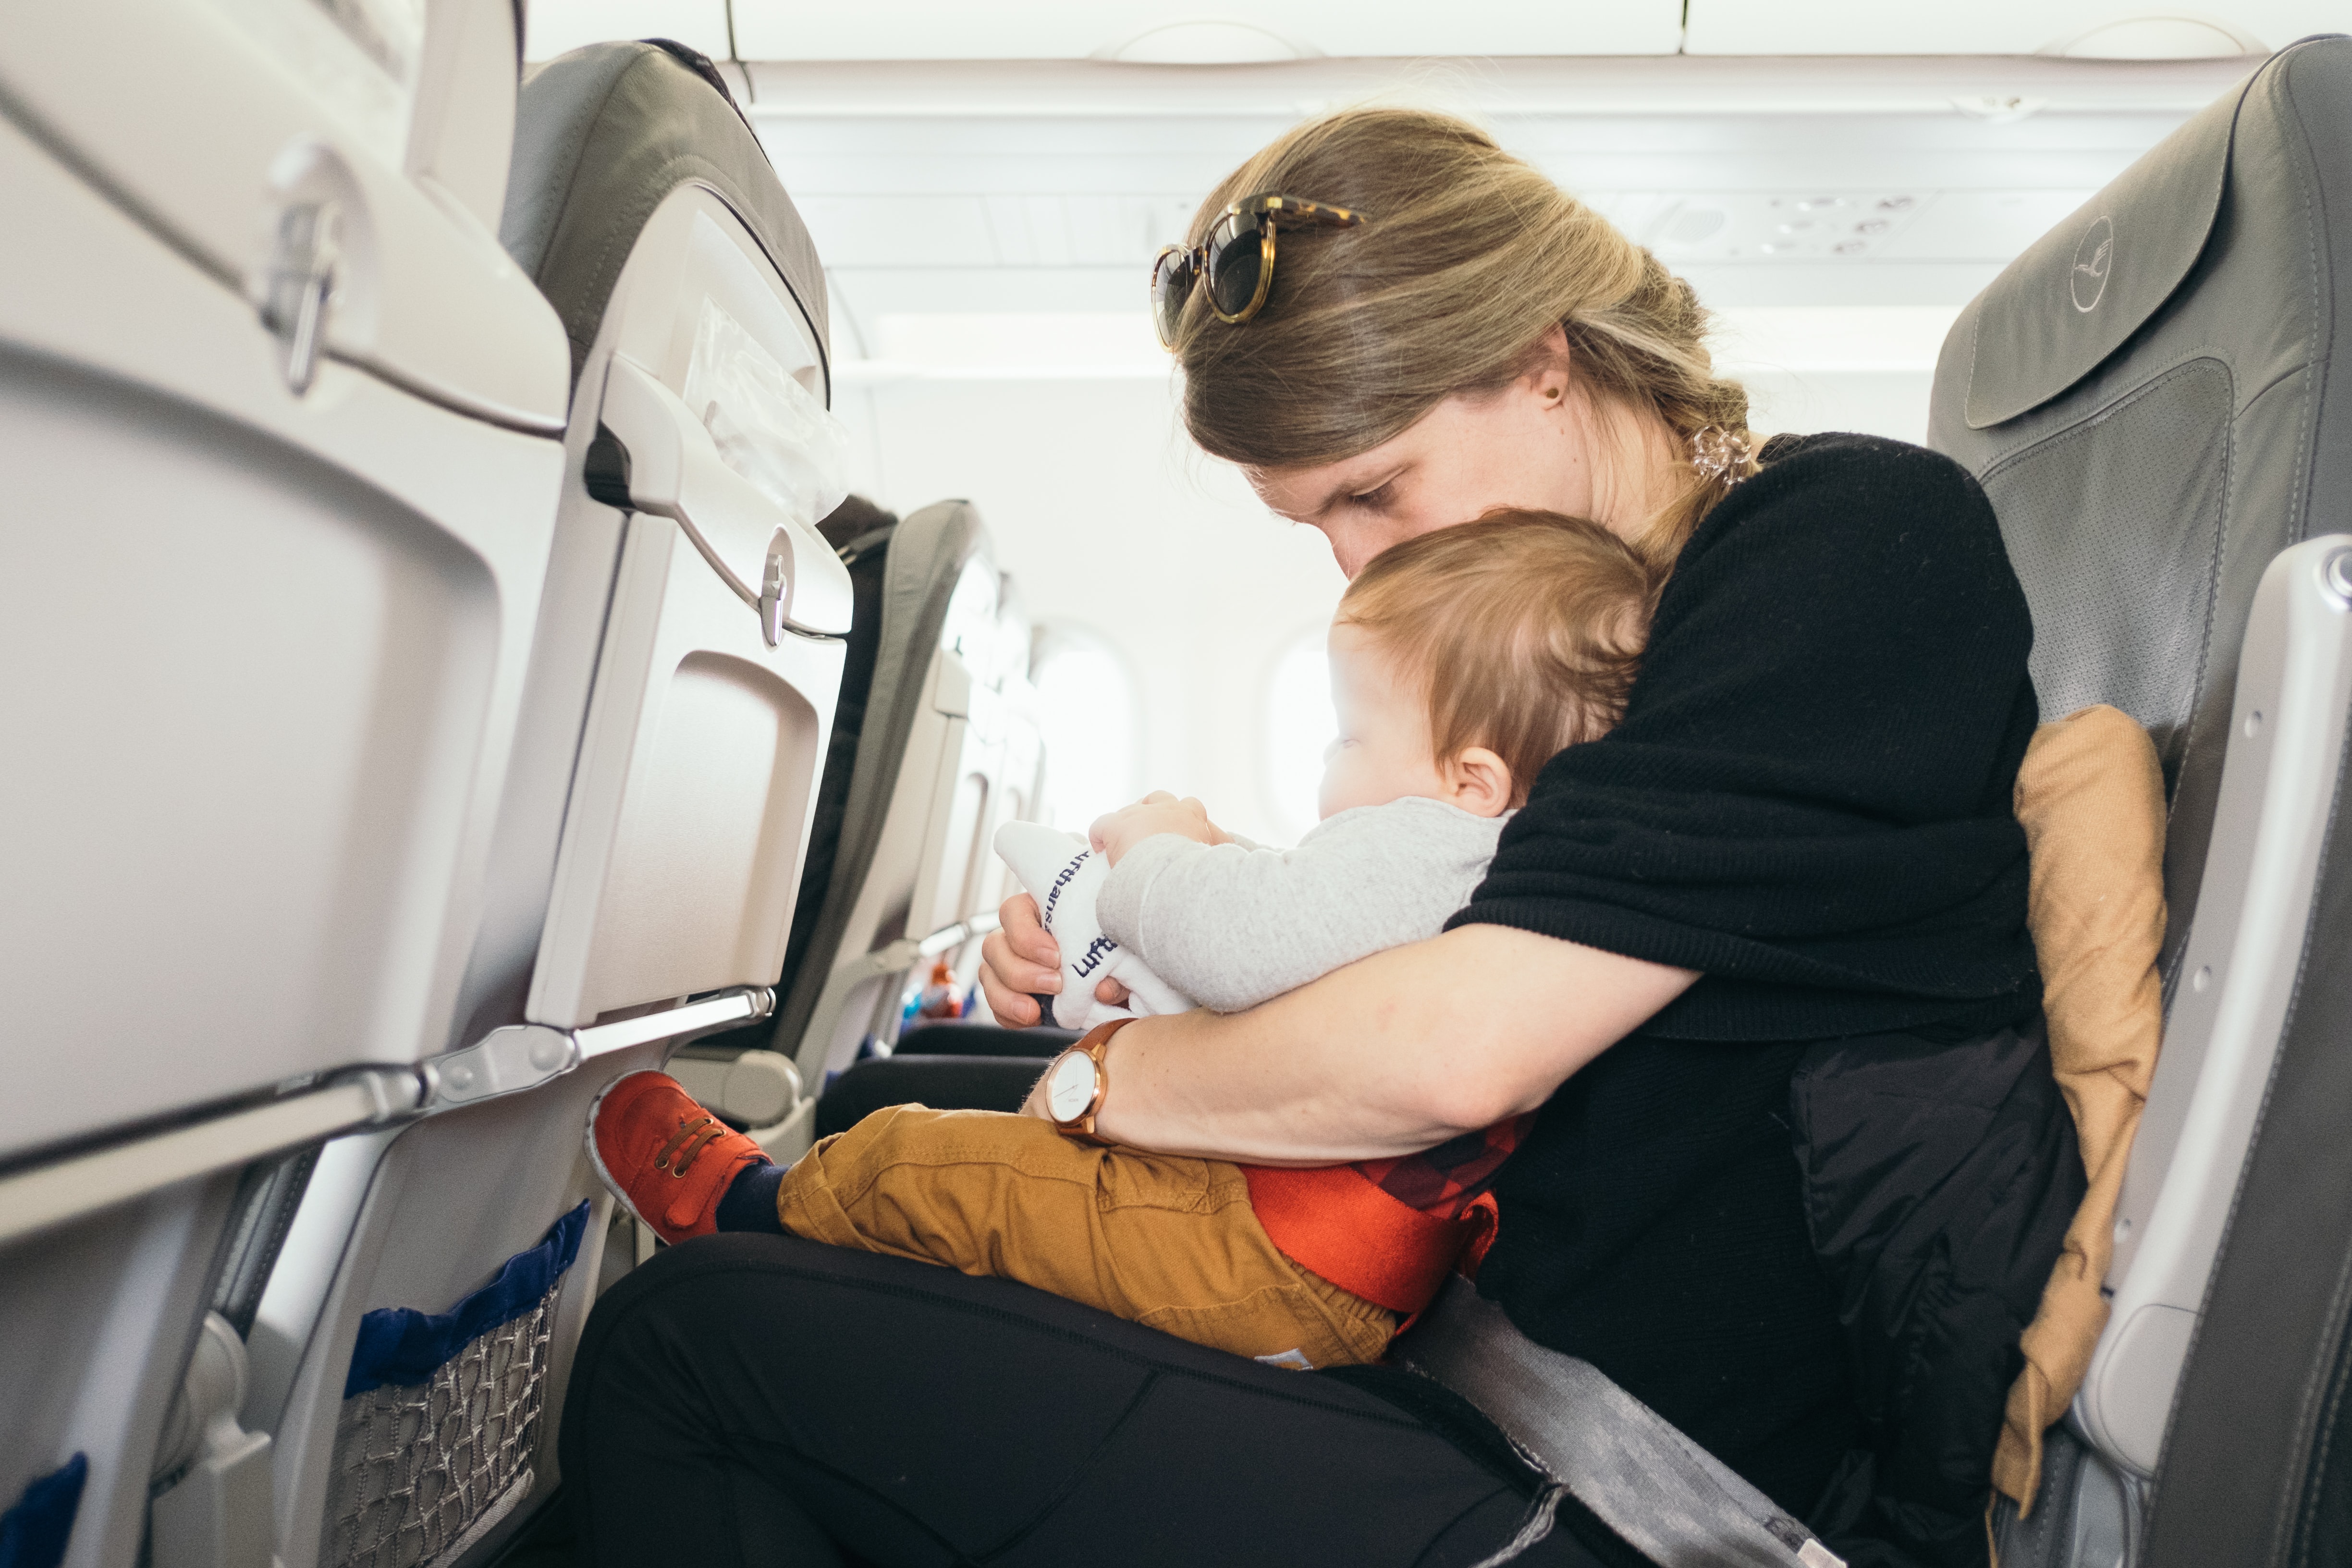 Woman and child on plane